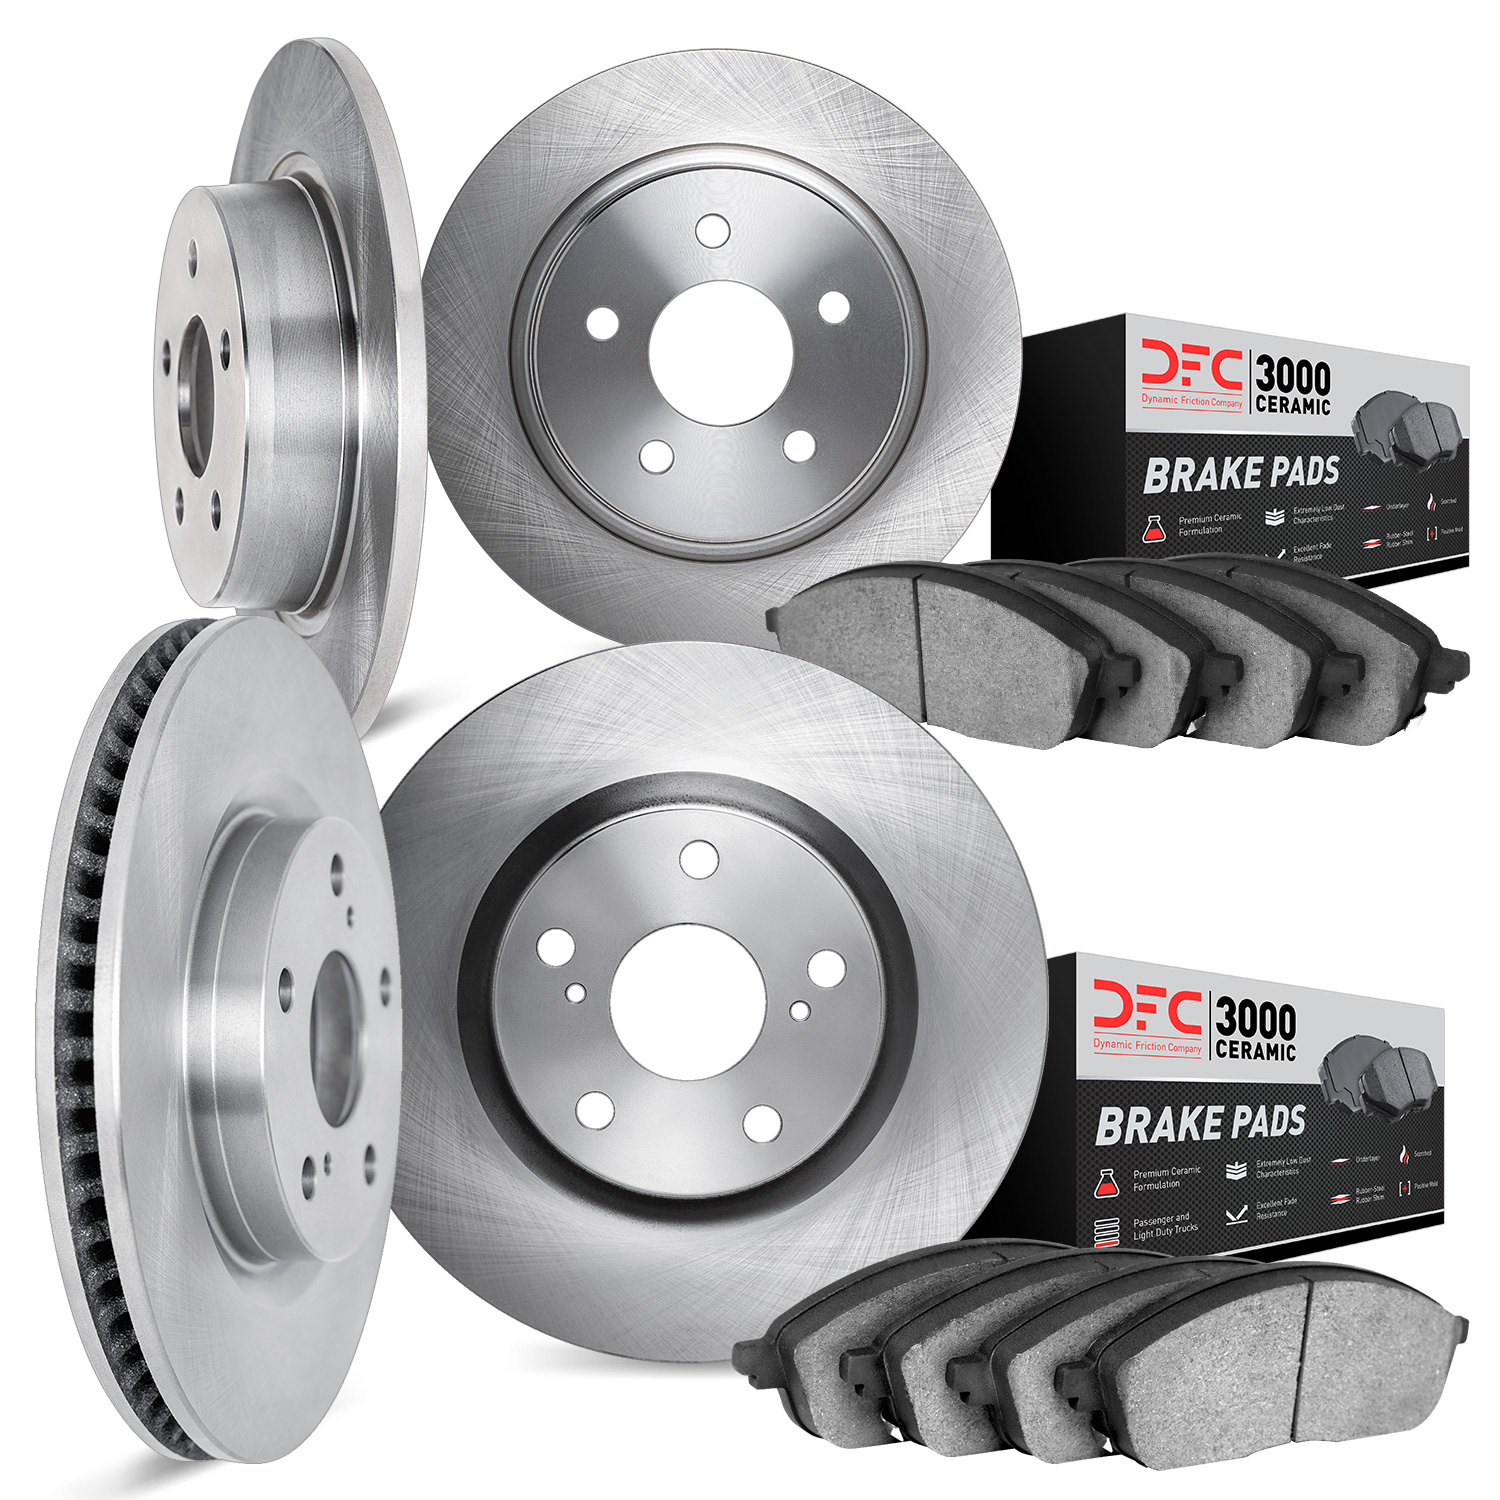 6304-59078 Brake Rotors with 3000-Series Ceramic Brake Pads Kit, Fits Select Acura/Honda, Position: Front and Rear